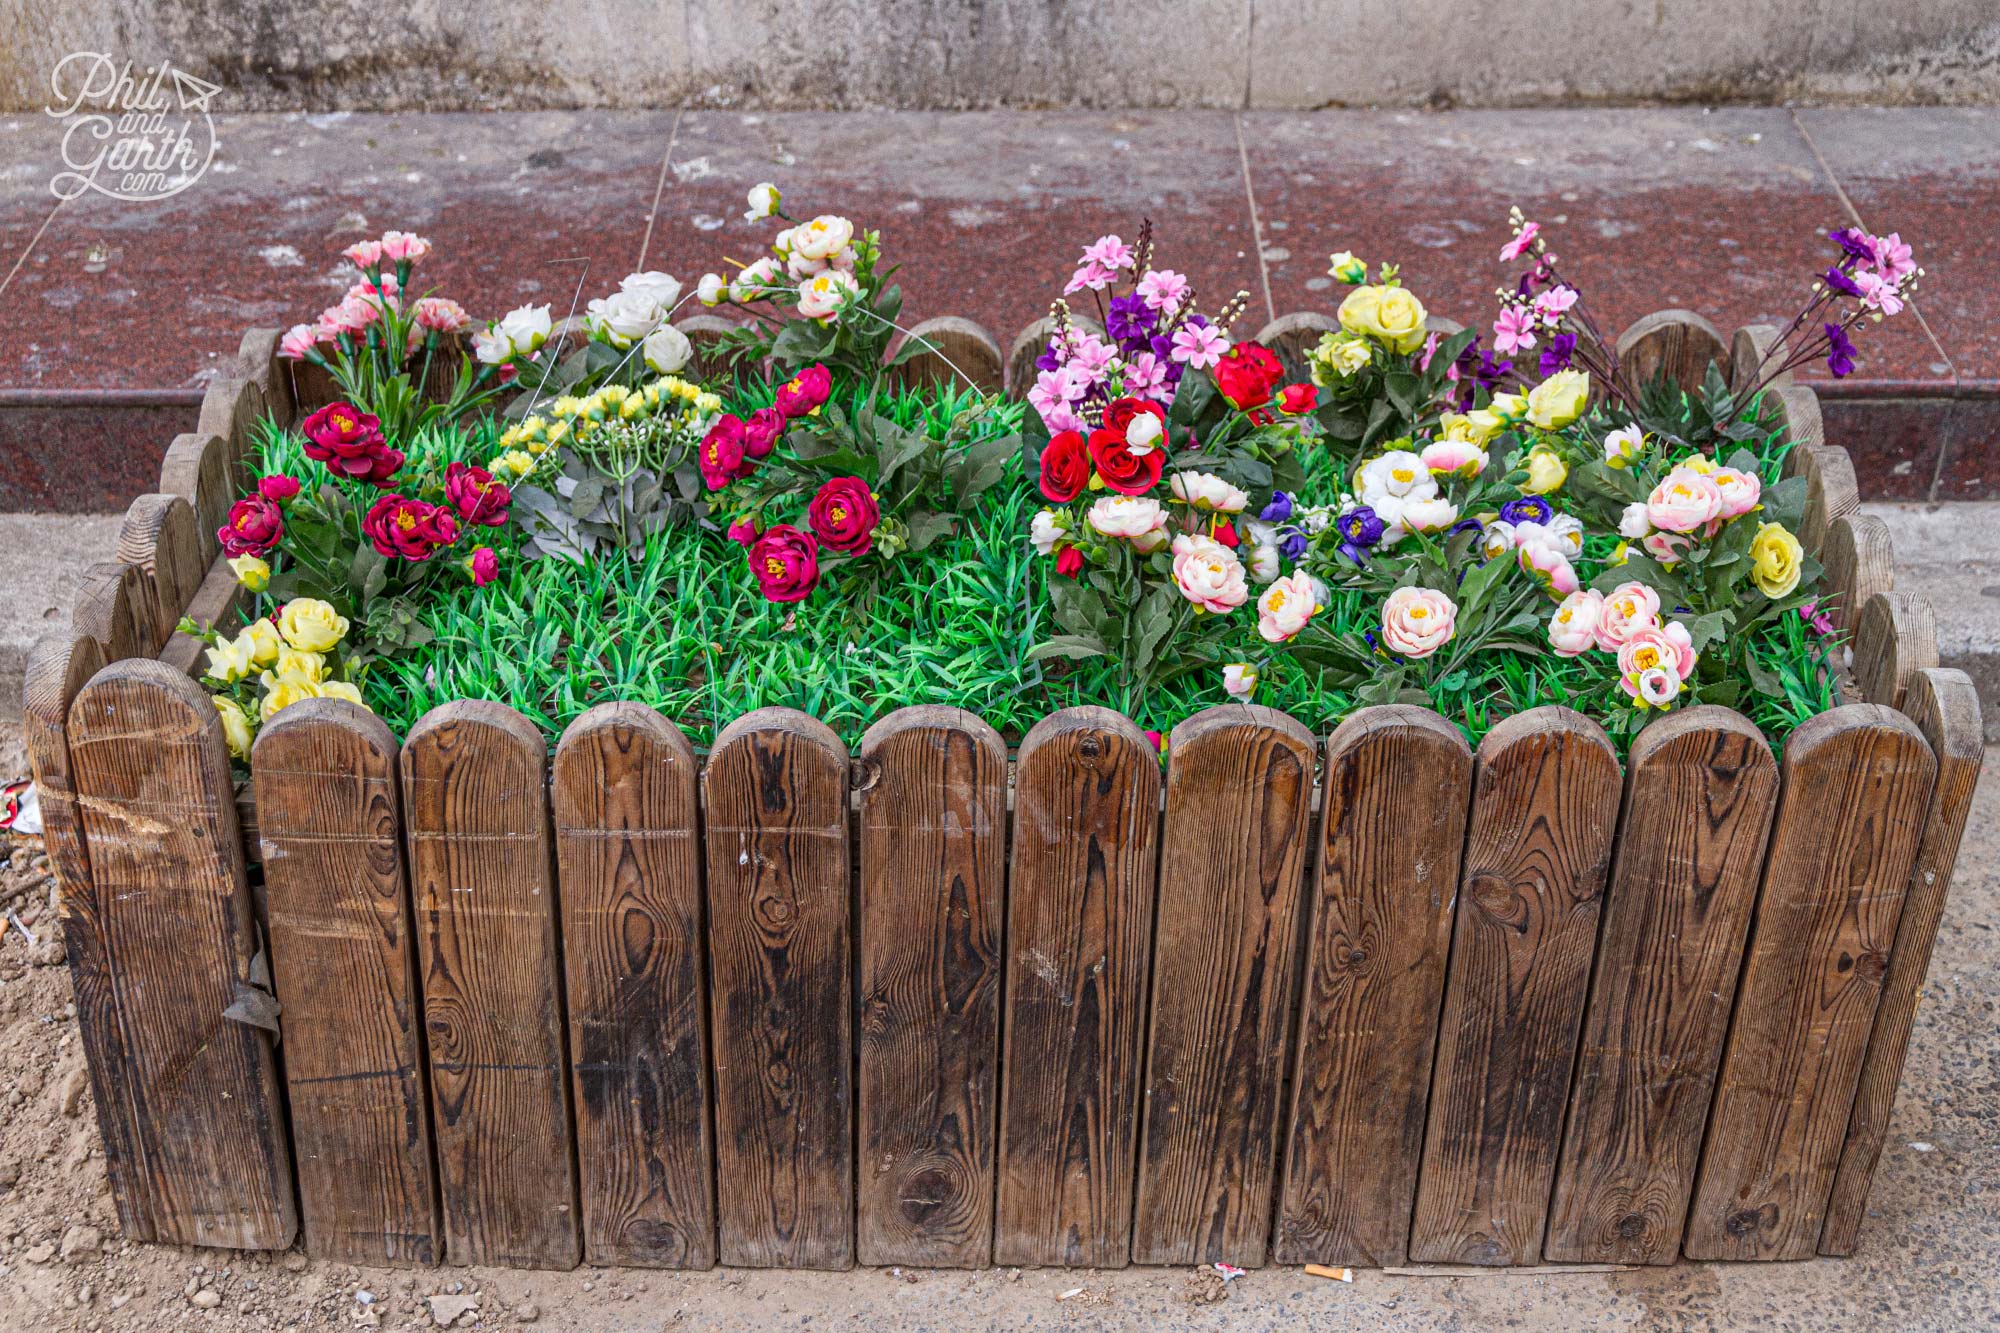 Plastic flowers on the streets of Beijing